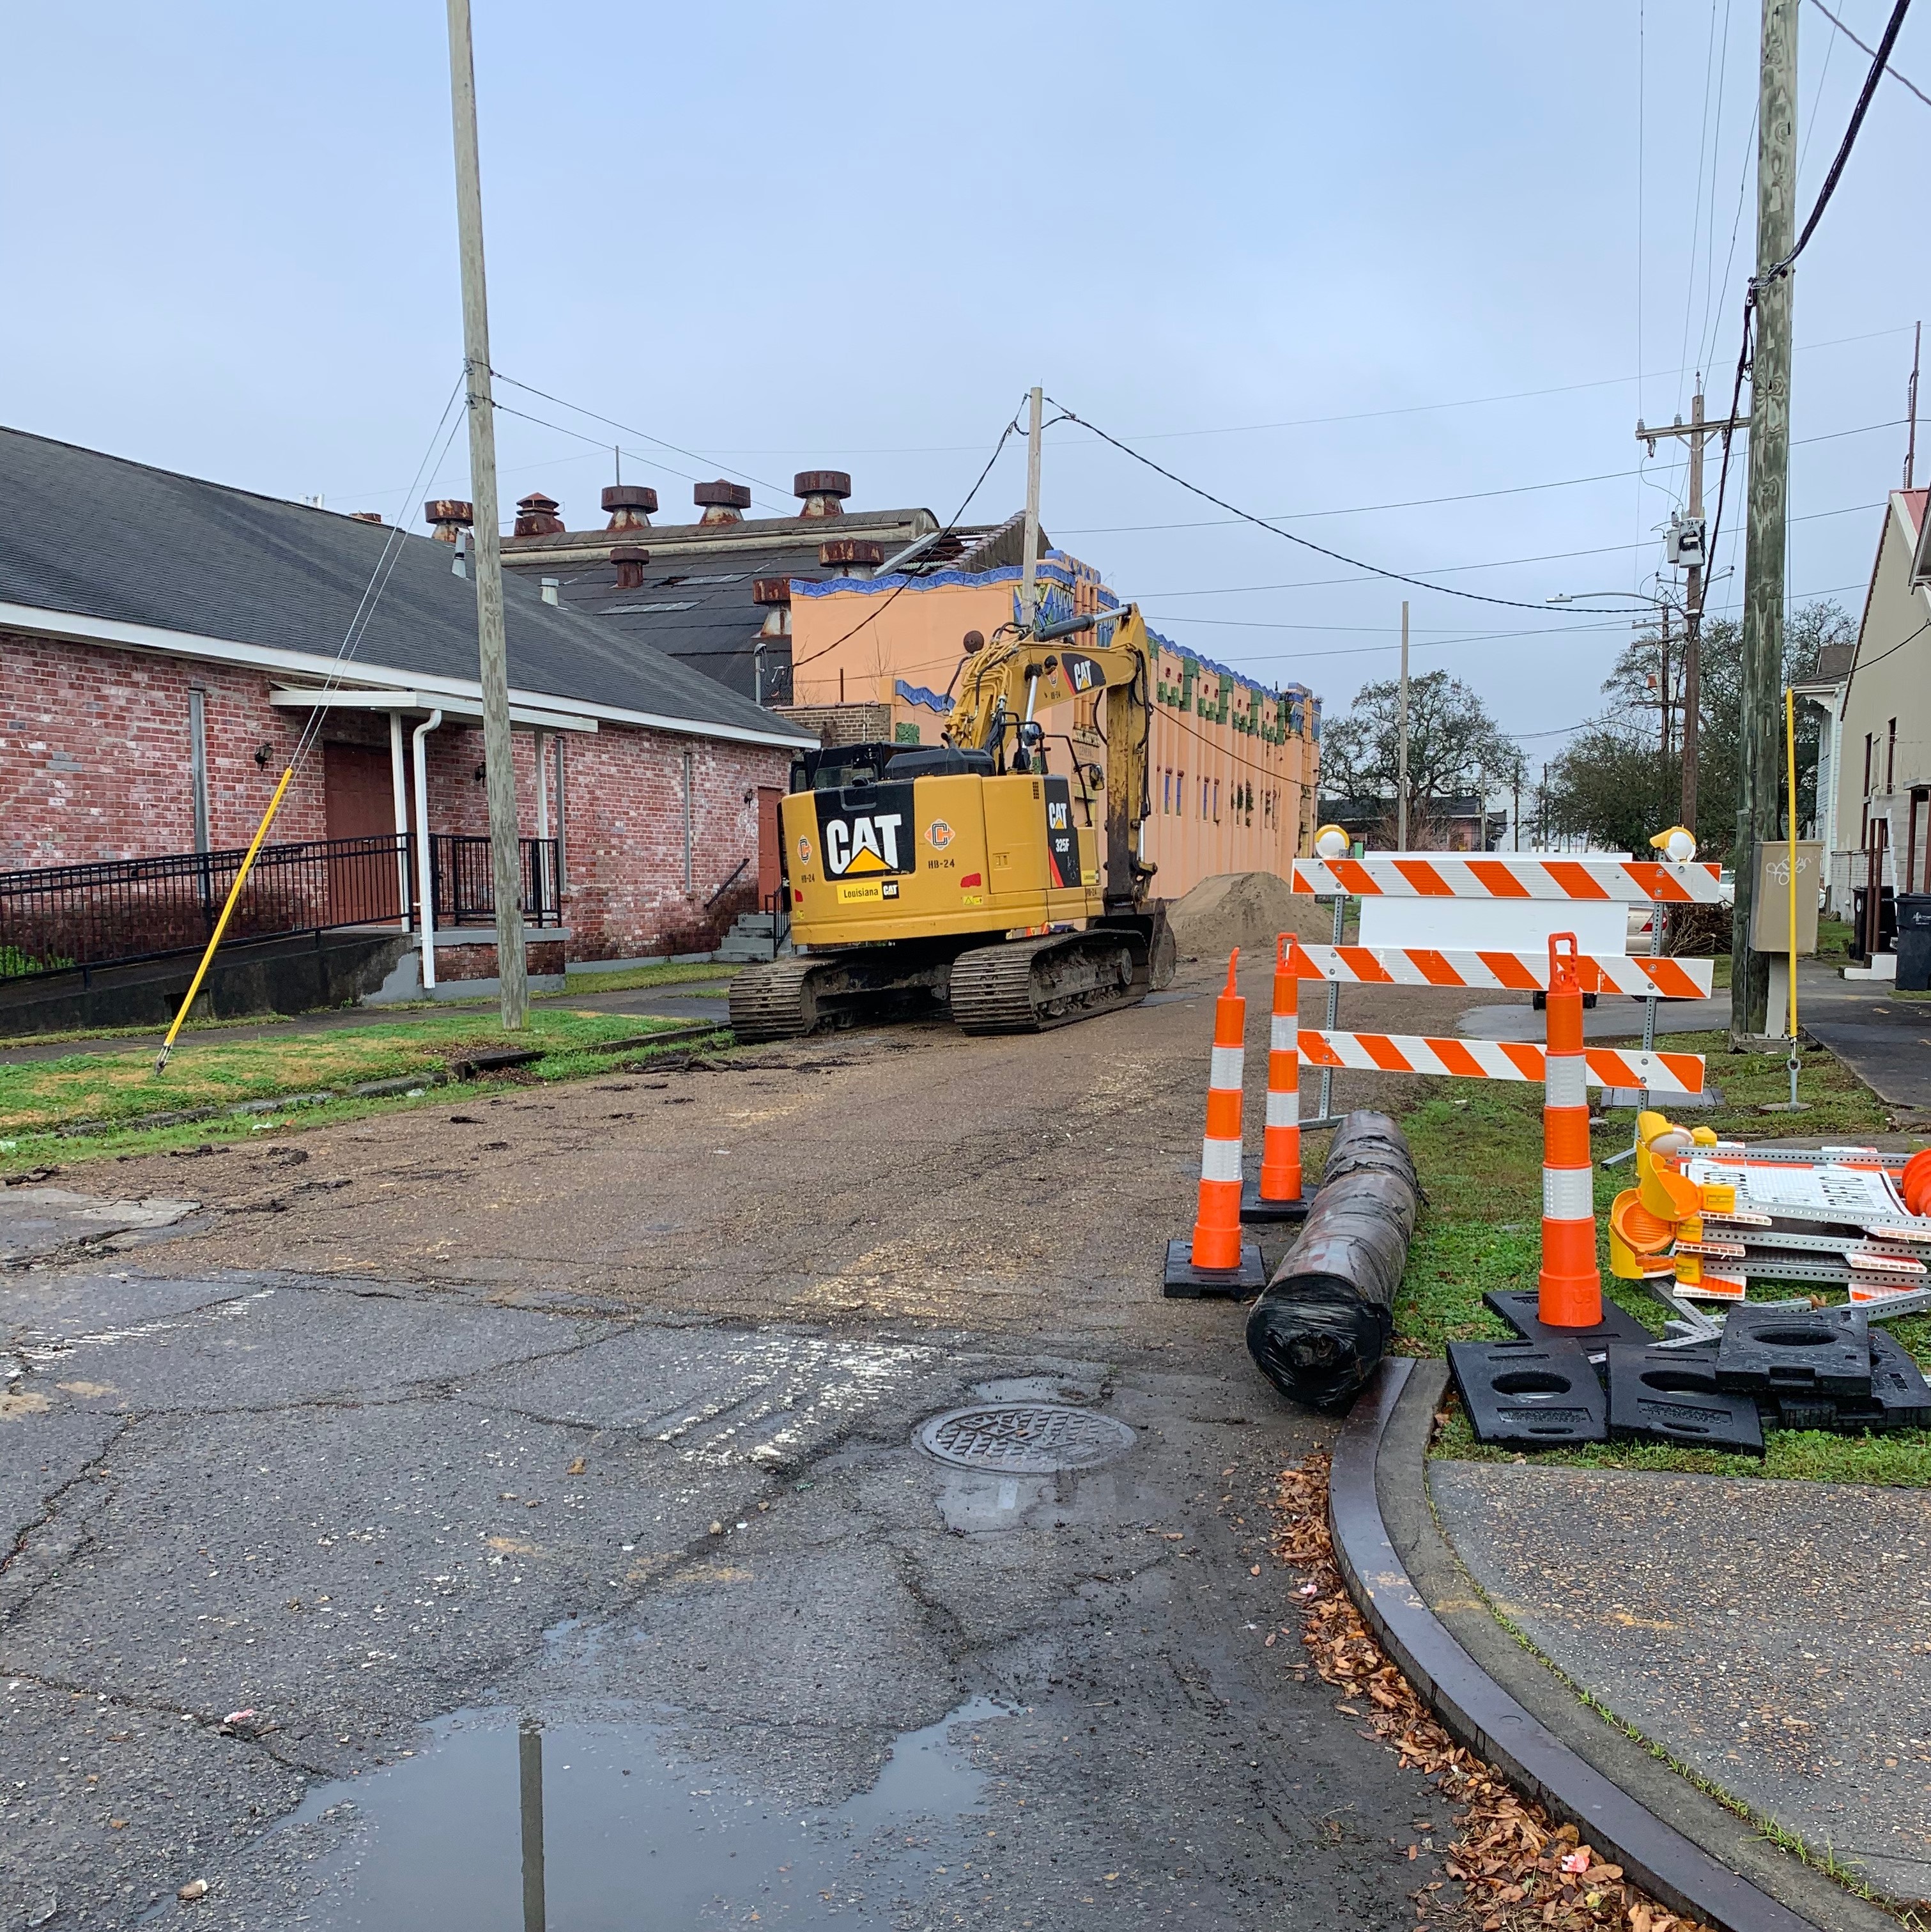 TREME-LAFITTE GROUP B SEWER SYSTEM EVALUATION AND REHABILATION PROGRAM (SSERP) WORK CONTINUES